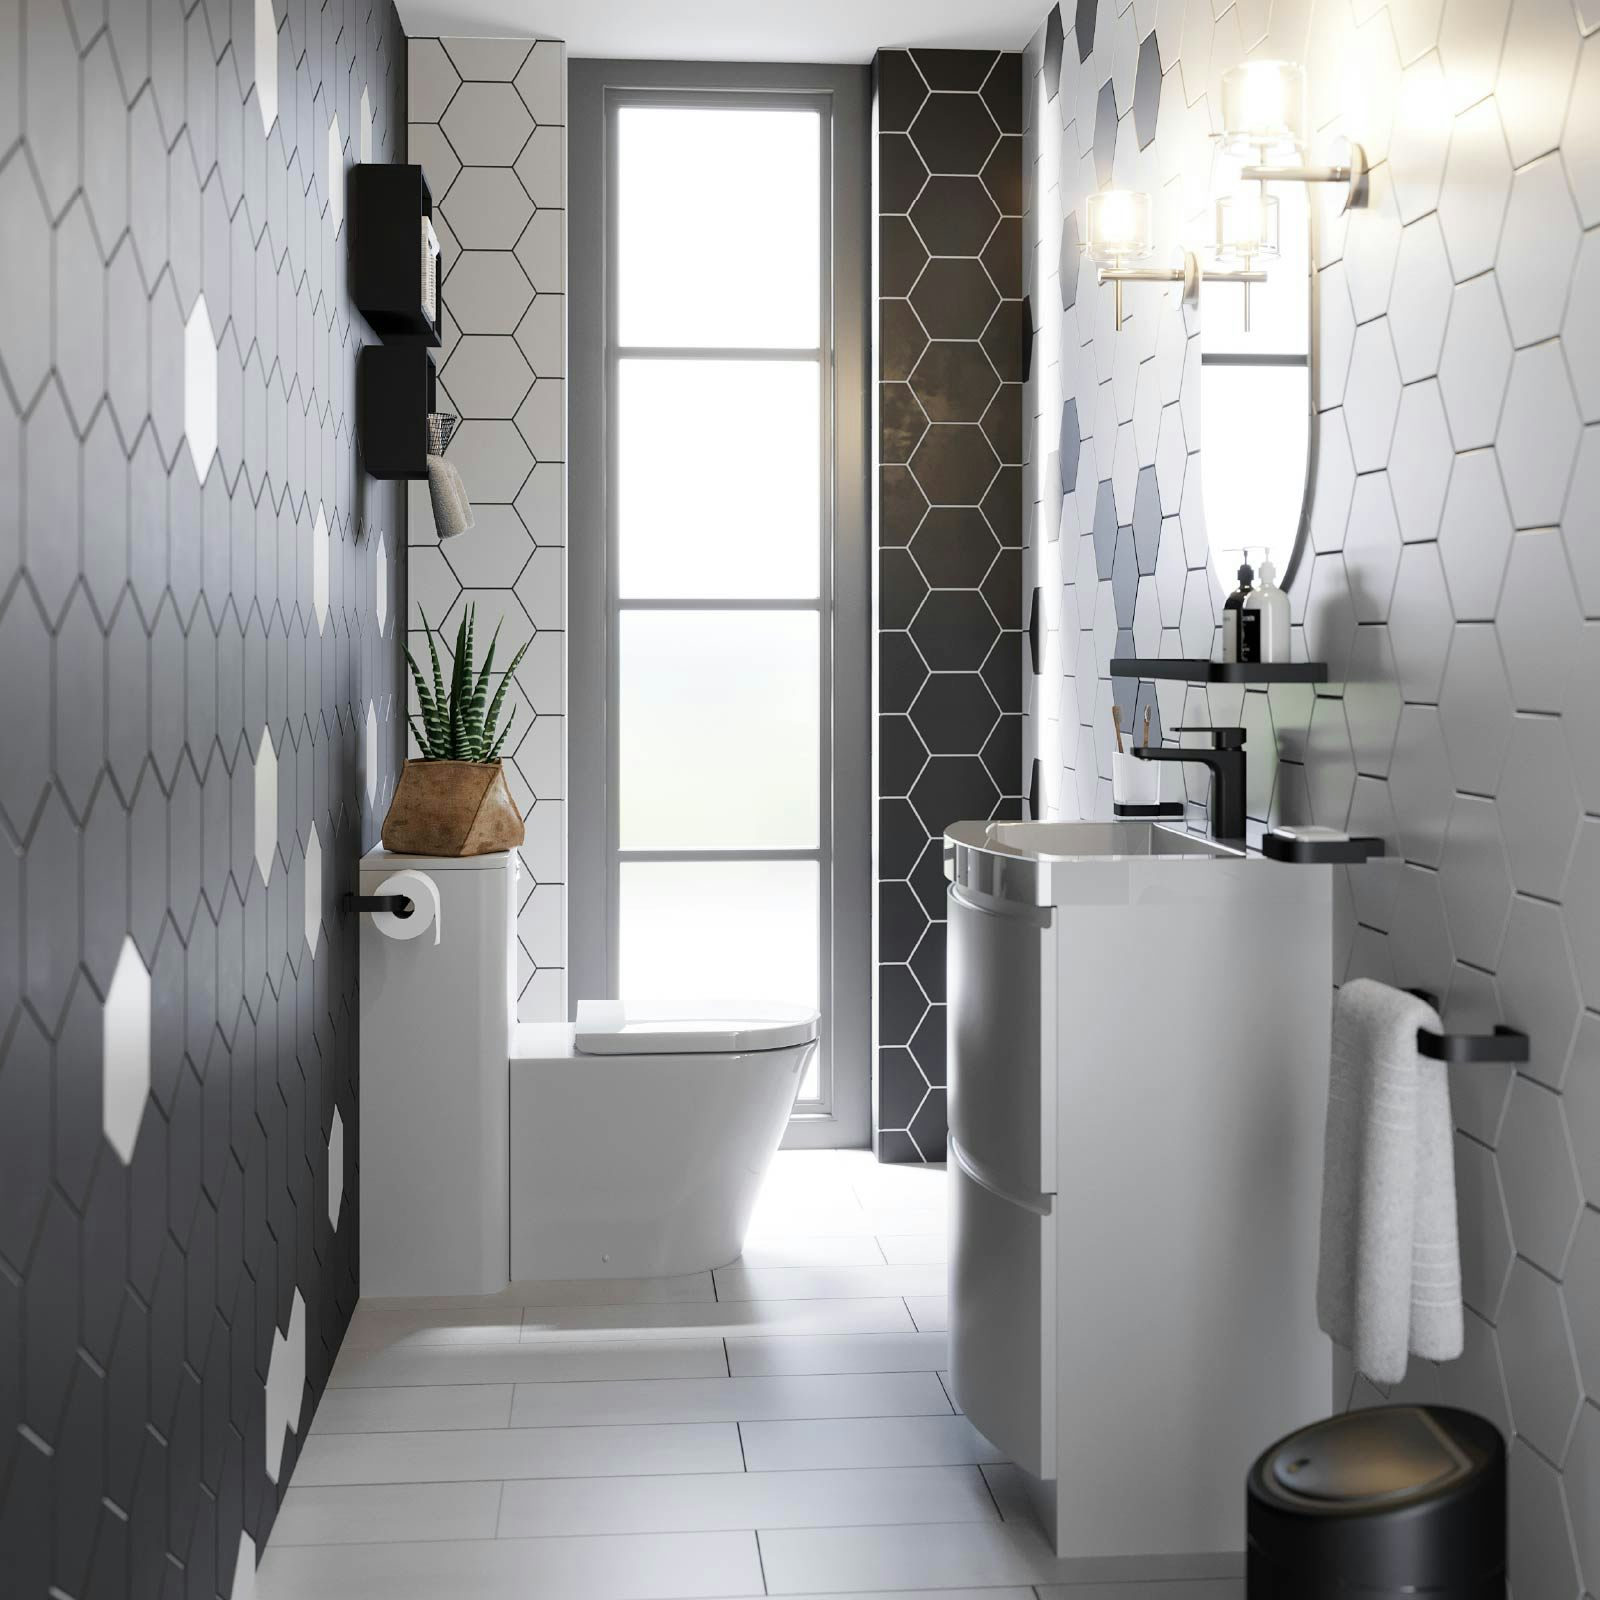 Give your bathroom a monochrome update